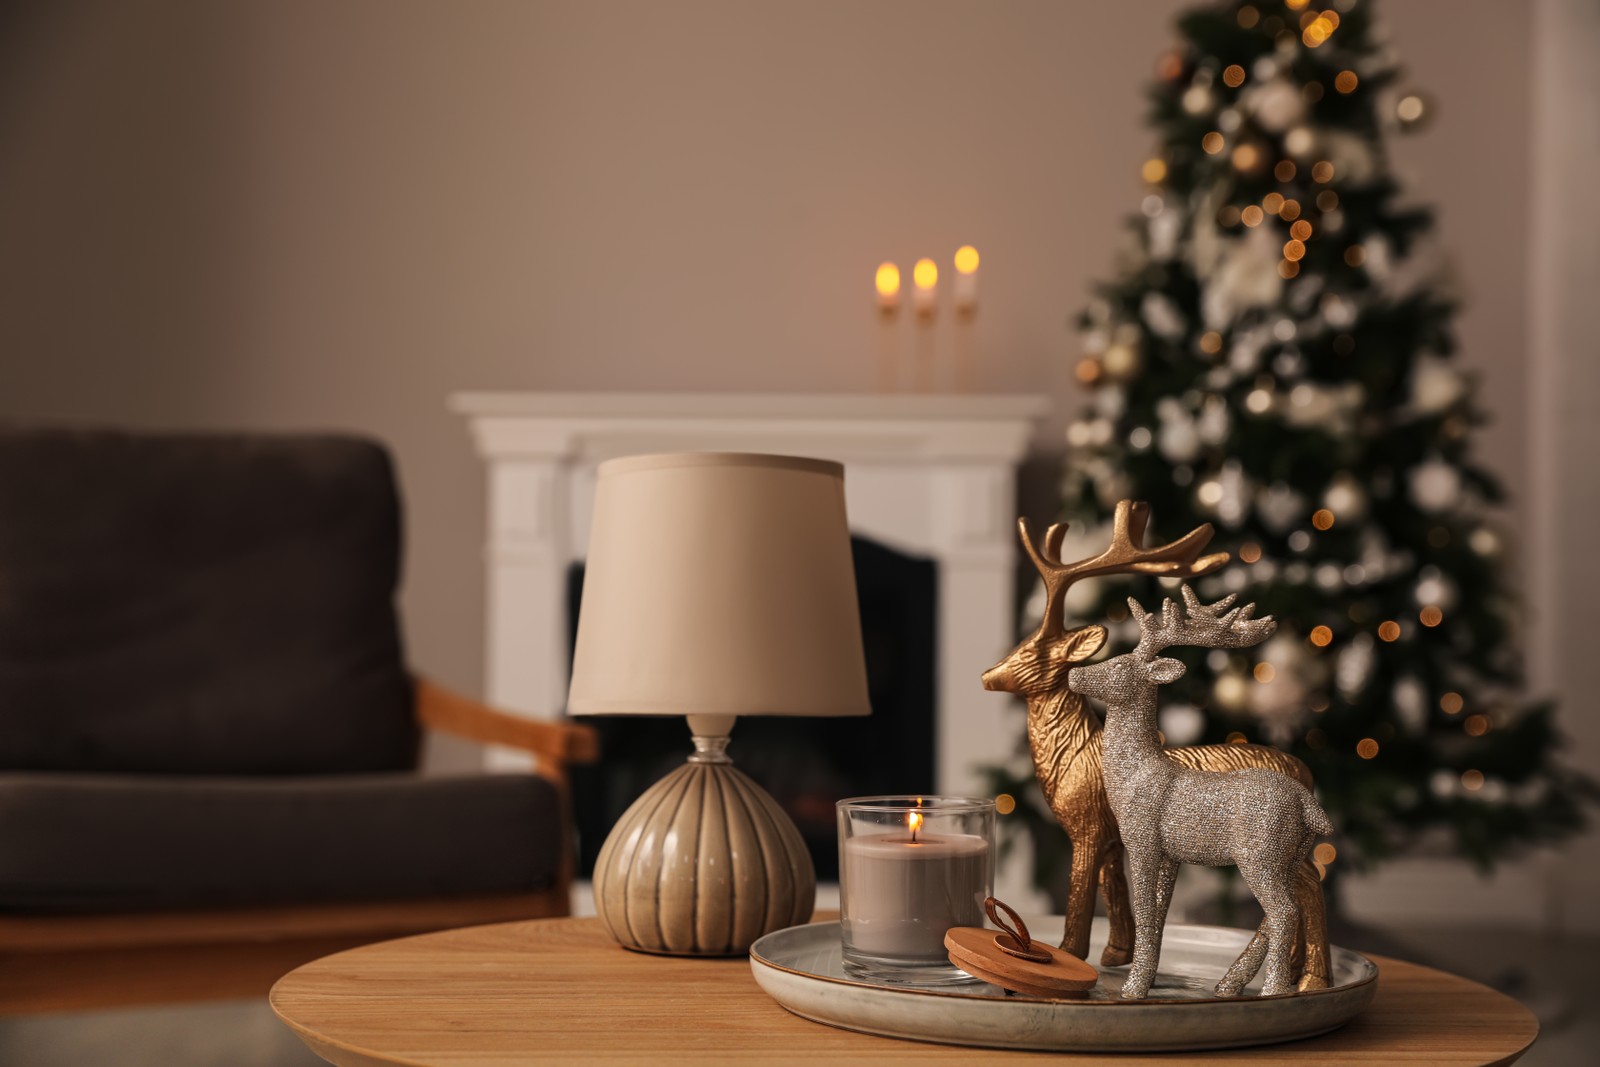 Photo of deer figures, burning candle with lamp on wooden table and Christmas tree in living room